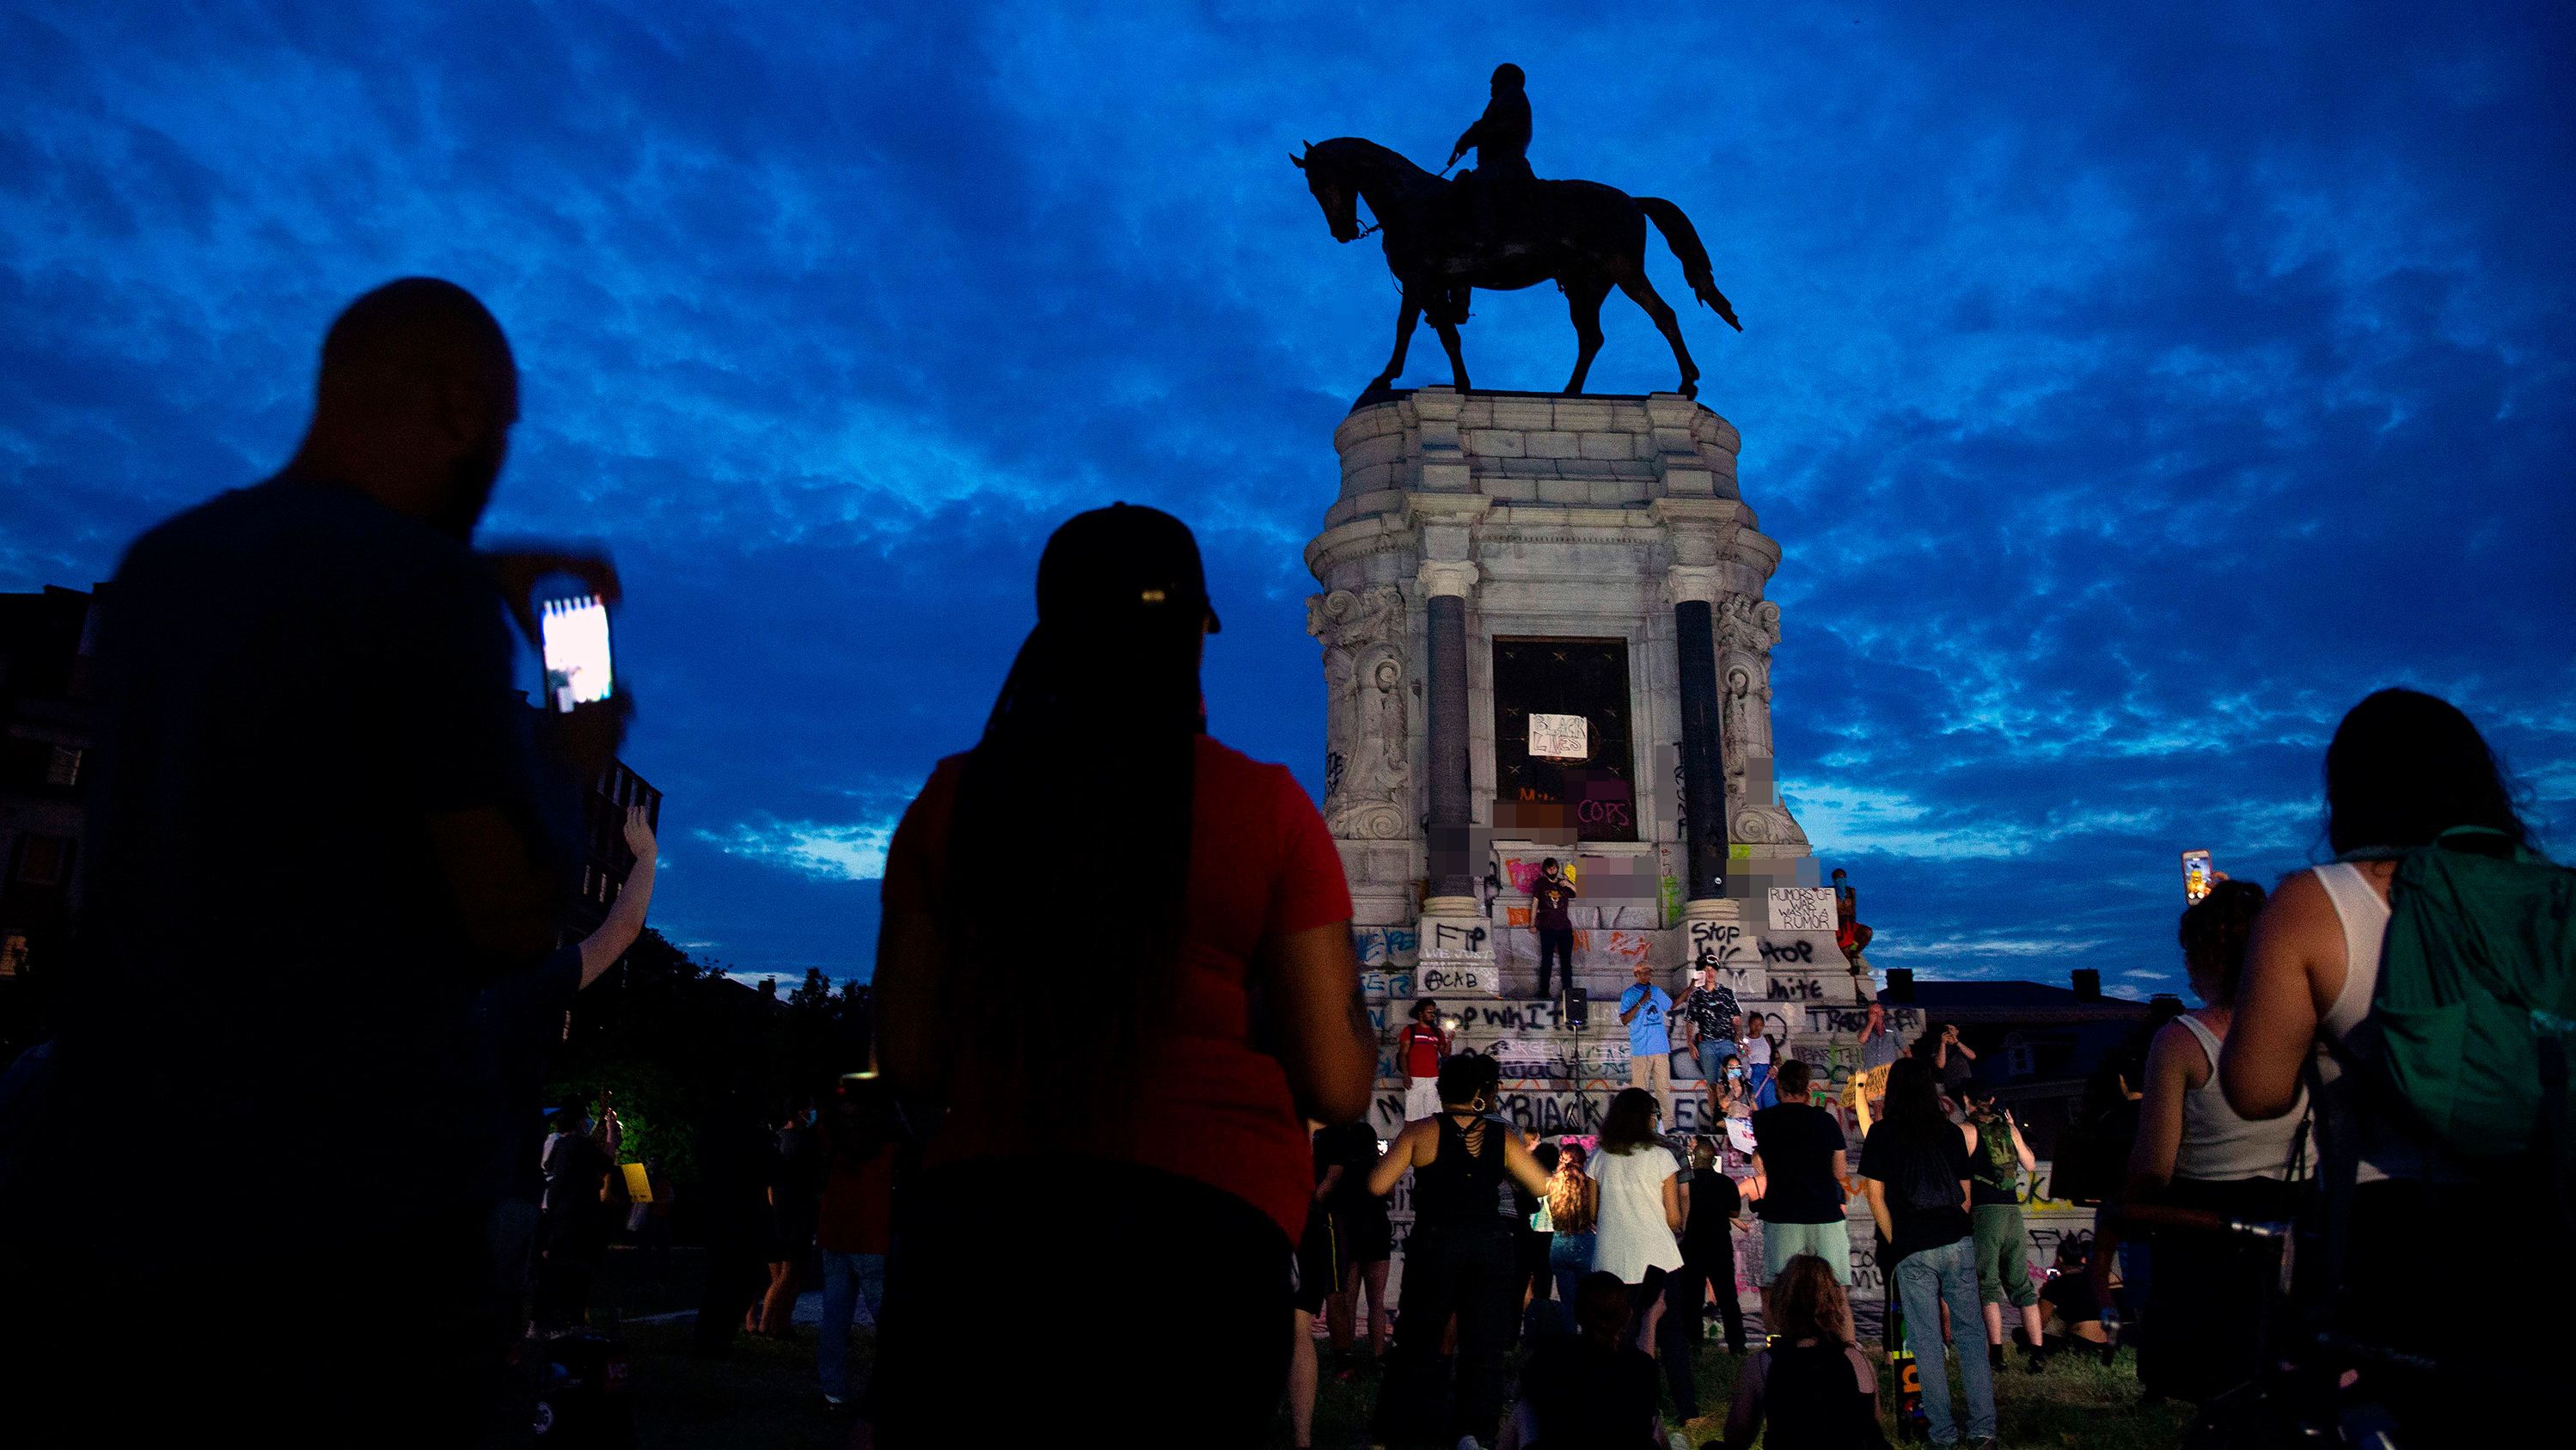 CNN has blurred expletives written on the base of the statue. People gather around the Robert E. Lee statue on Monument Avenue in Richmond, Virginia, on June 4, 2020, amid continued protests over the death of George Floyd in police custody. - Earlier in the day, Virginia governor Ralph Northam announced plans to remove the statue of the Confederate general, directing the Department of General Services to remove it "as soon as possible." (Photo by Ryan M. Kelly / AFP) (Photo by RYAN M. KELLY/AFP via Getty Images)